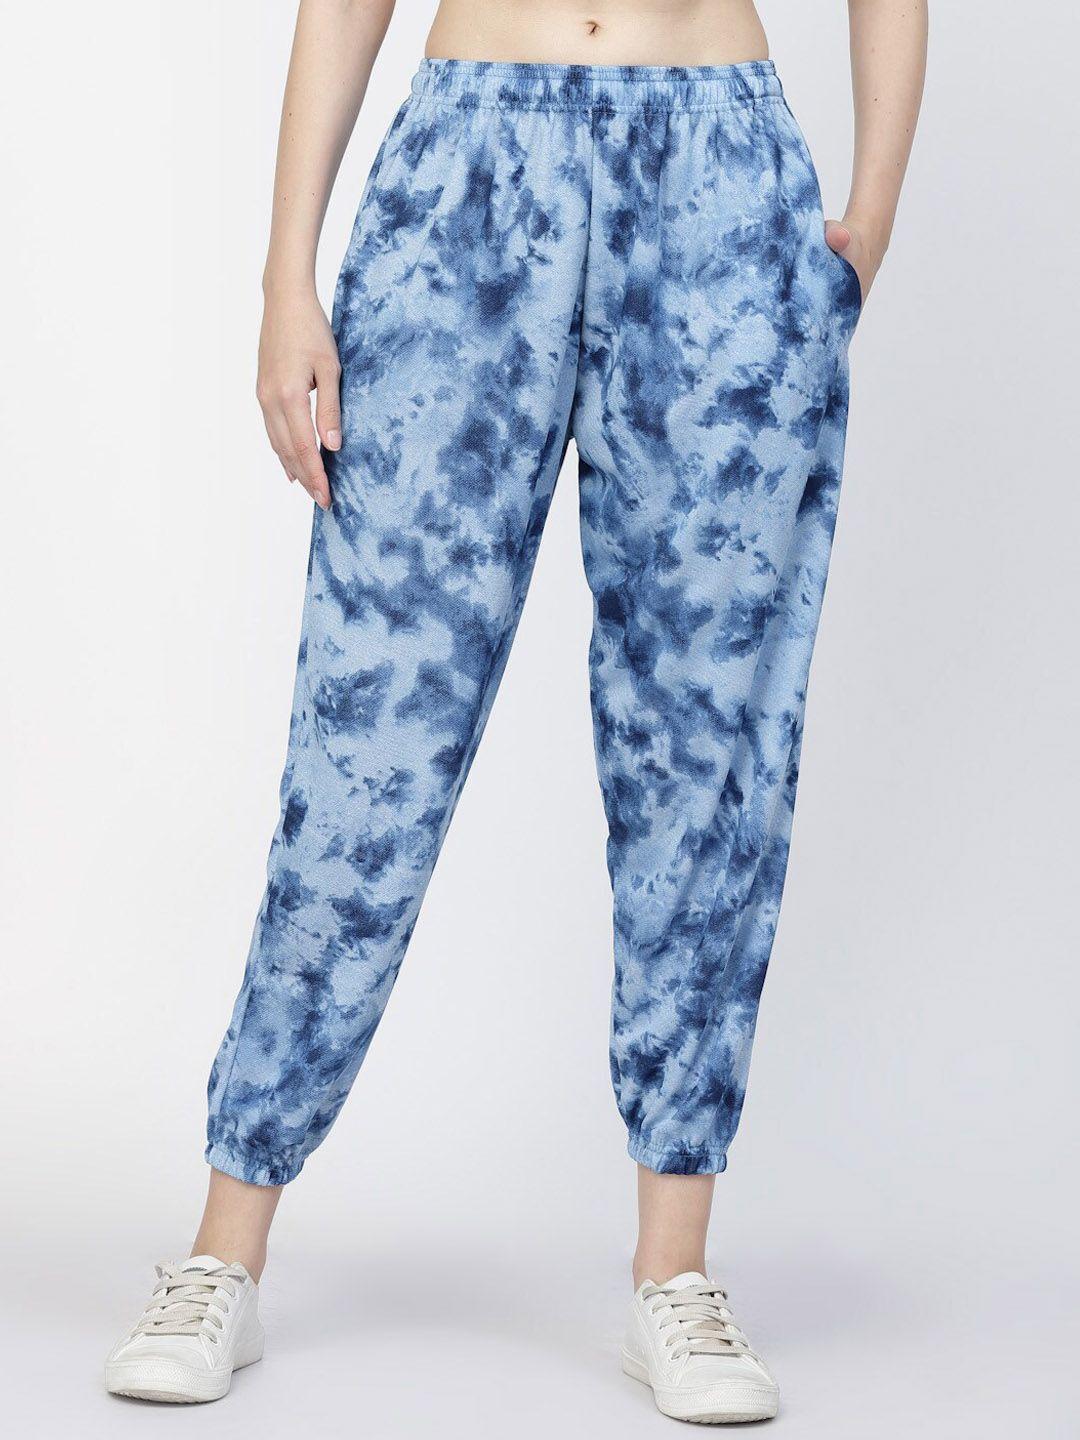 uzarus women abstract printed relaxed fit joggers